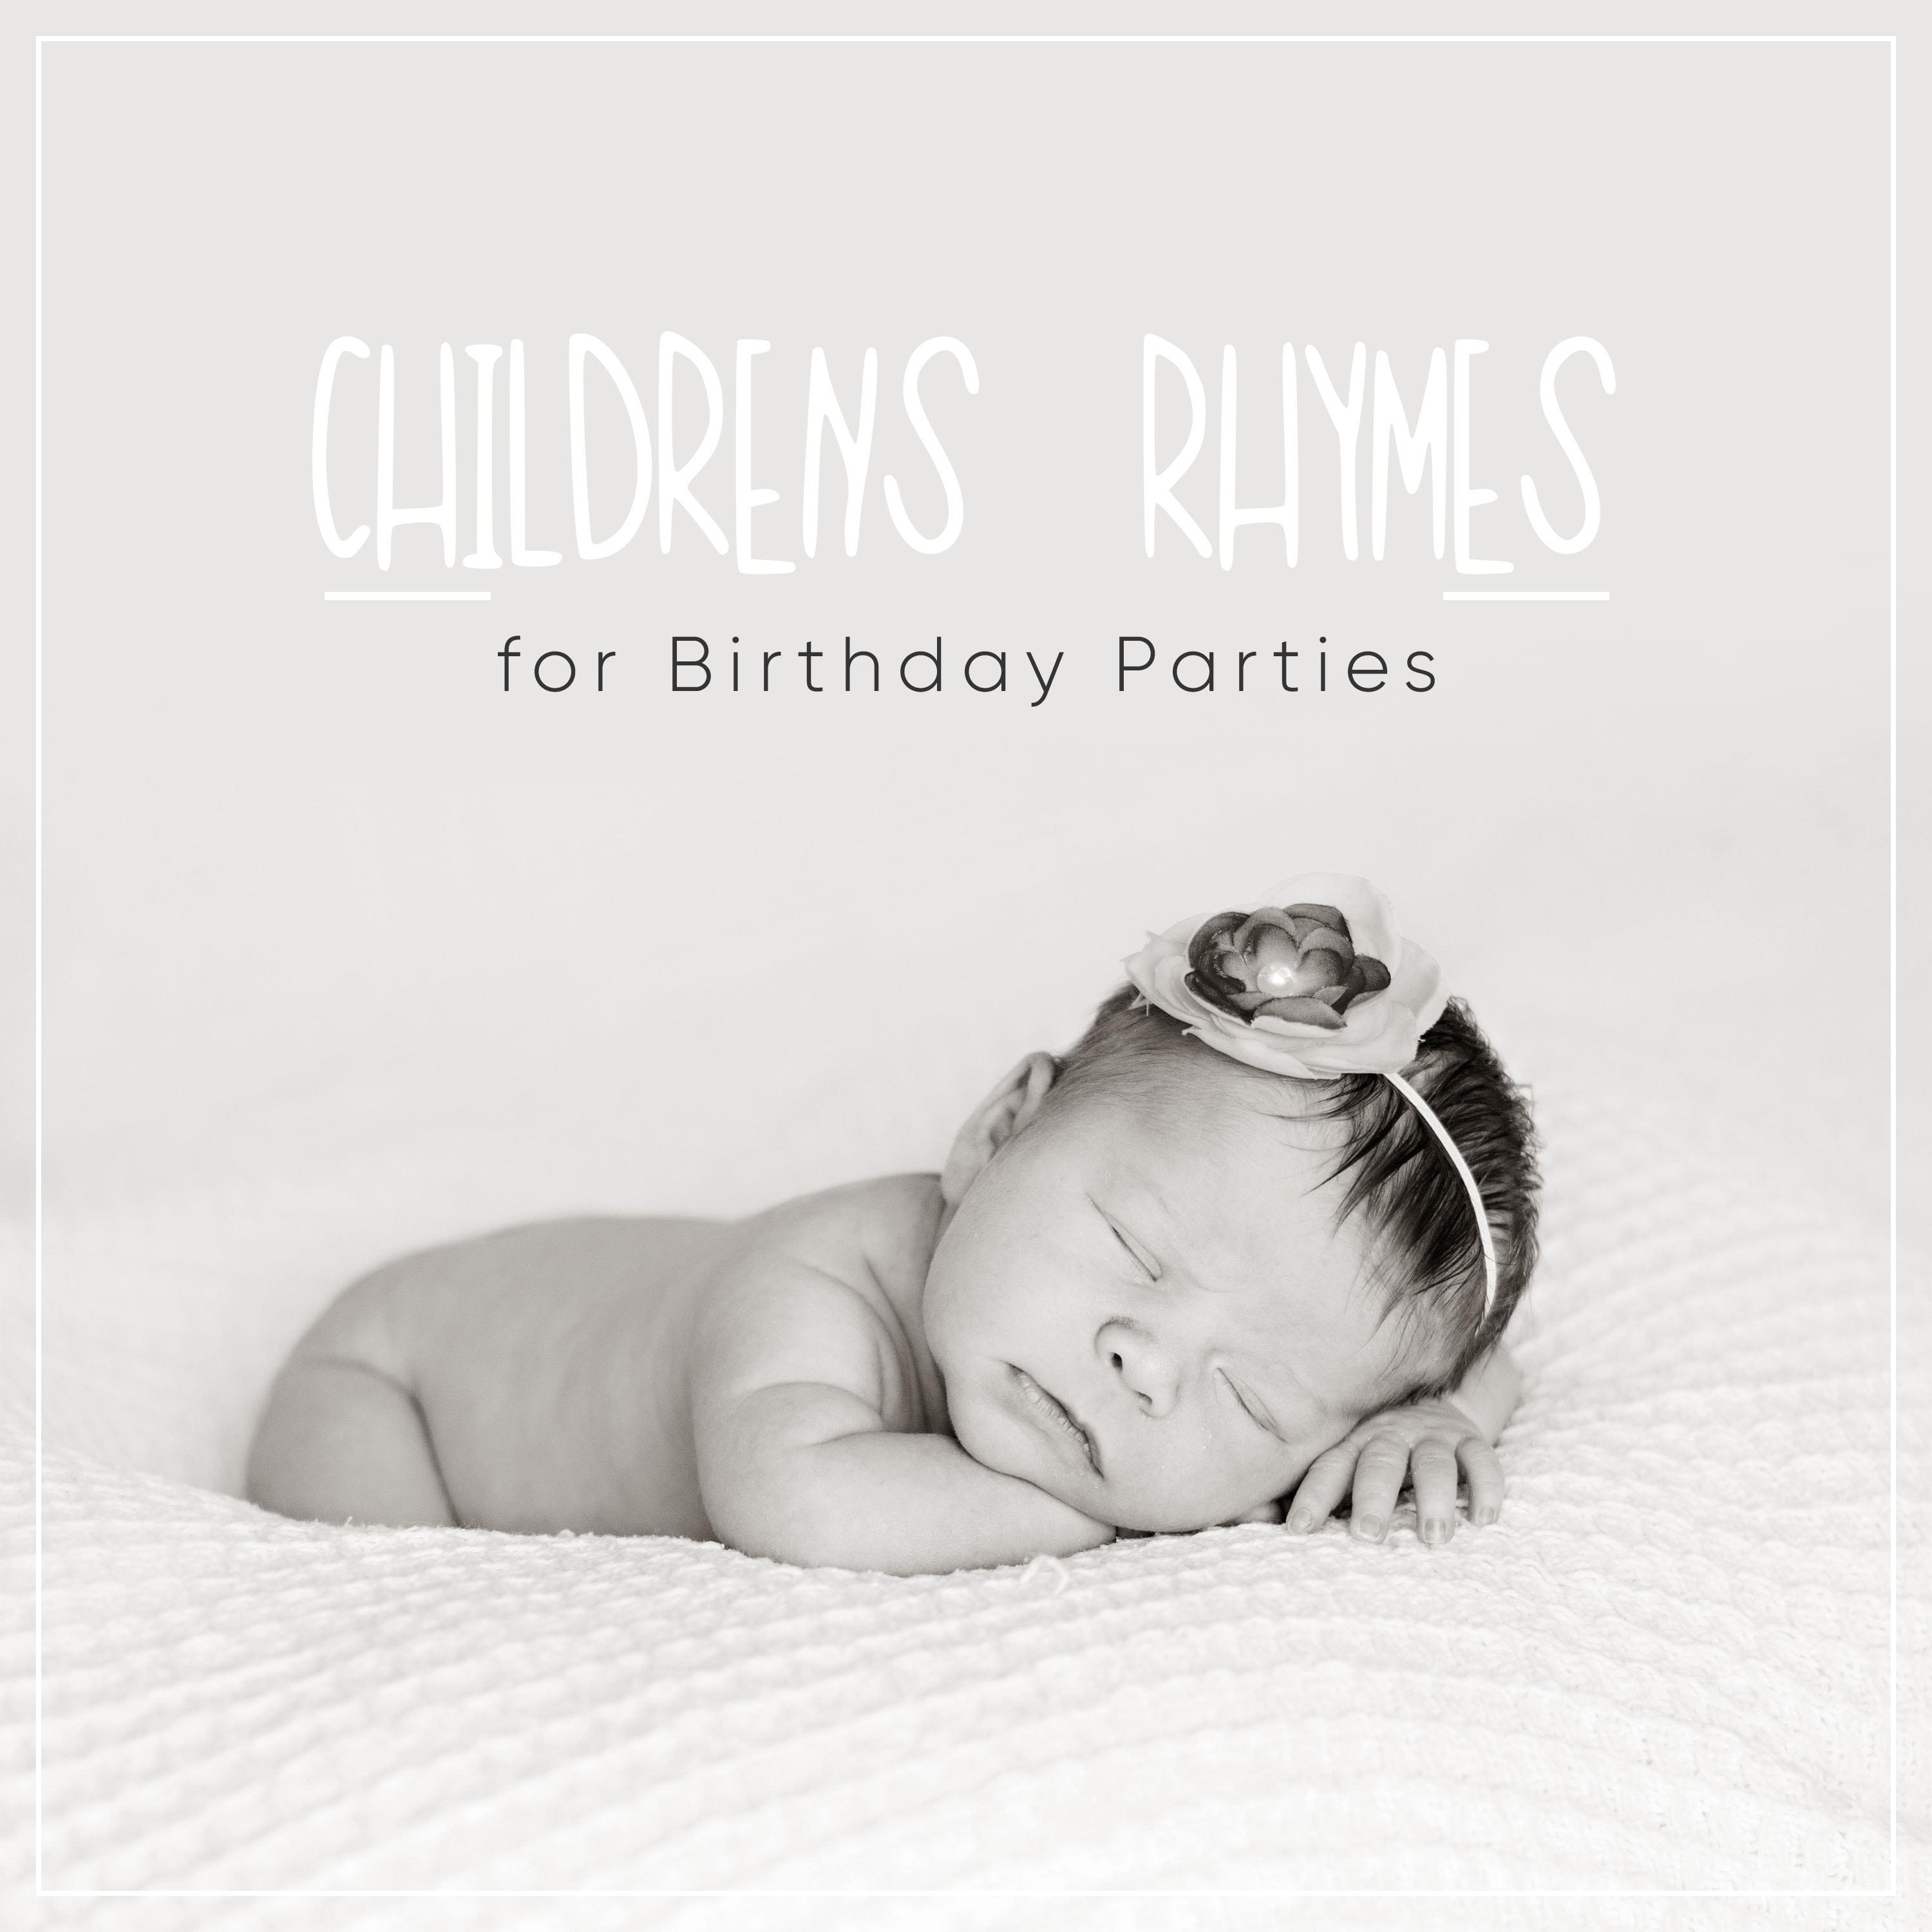 #11 Childrens Rhymes for Birthday Parties